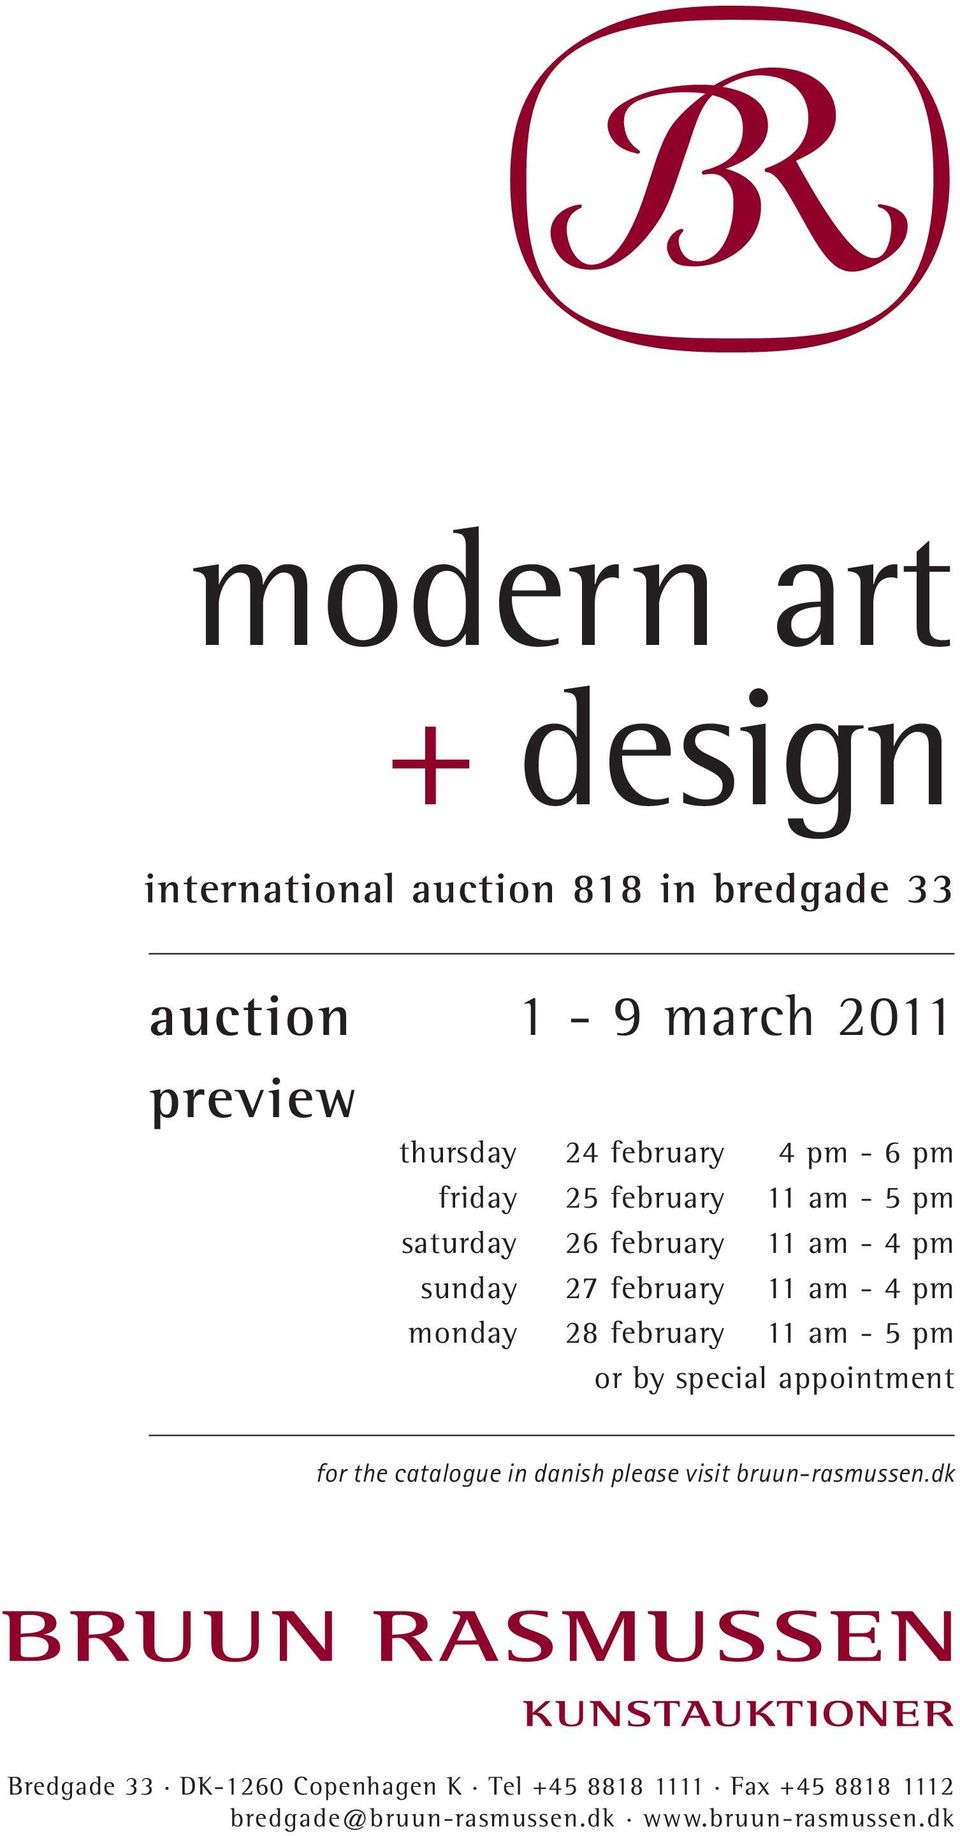 28 february 11 am - 5 pm or by special appointment for the catalogue in danish please visit bruun-rasmussen.